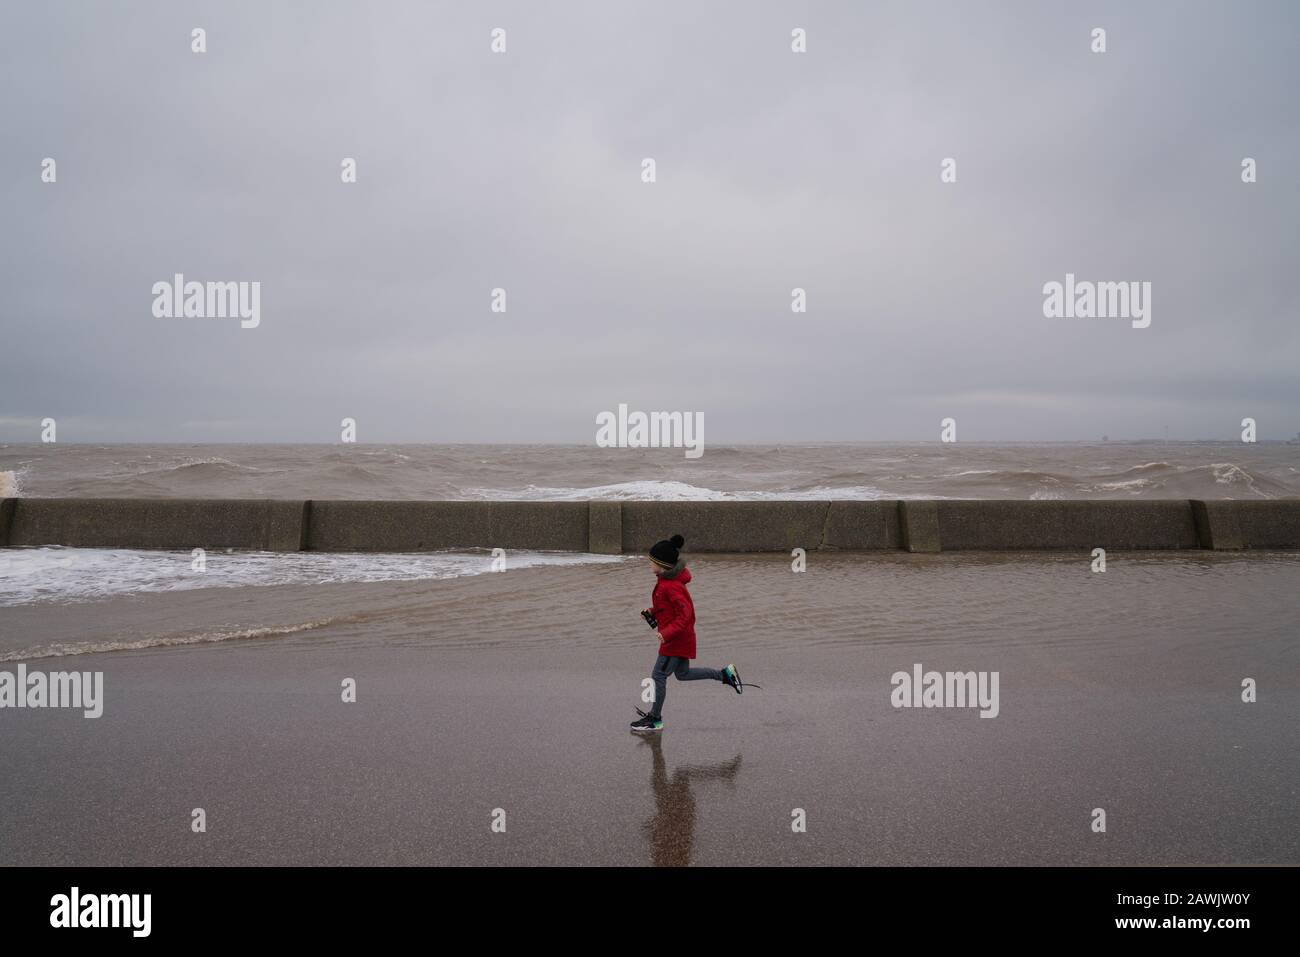 New Brighton, Wirral, UK. 9th Feb, 2020. A child runs along the promenade as gale force winds and waves crashed into the promenade at New Brighton on the Wirral in the north west of England on Sunday, February 9, 2020. Credit: Christopher Middleton/Alamy Live News Stock Photo